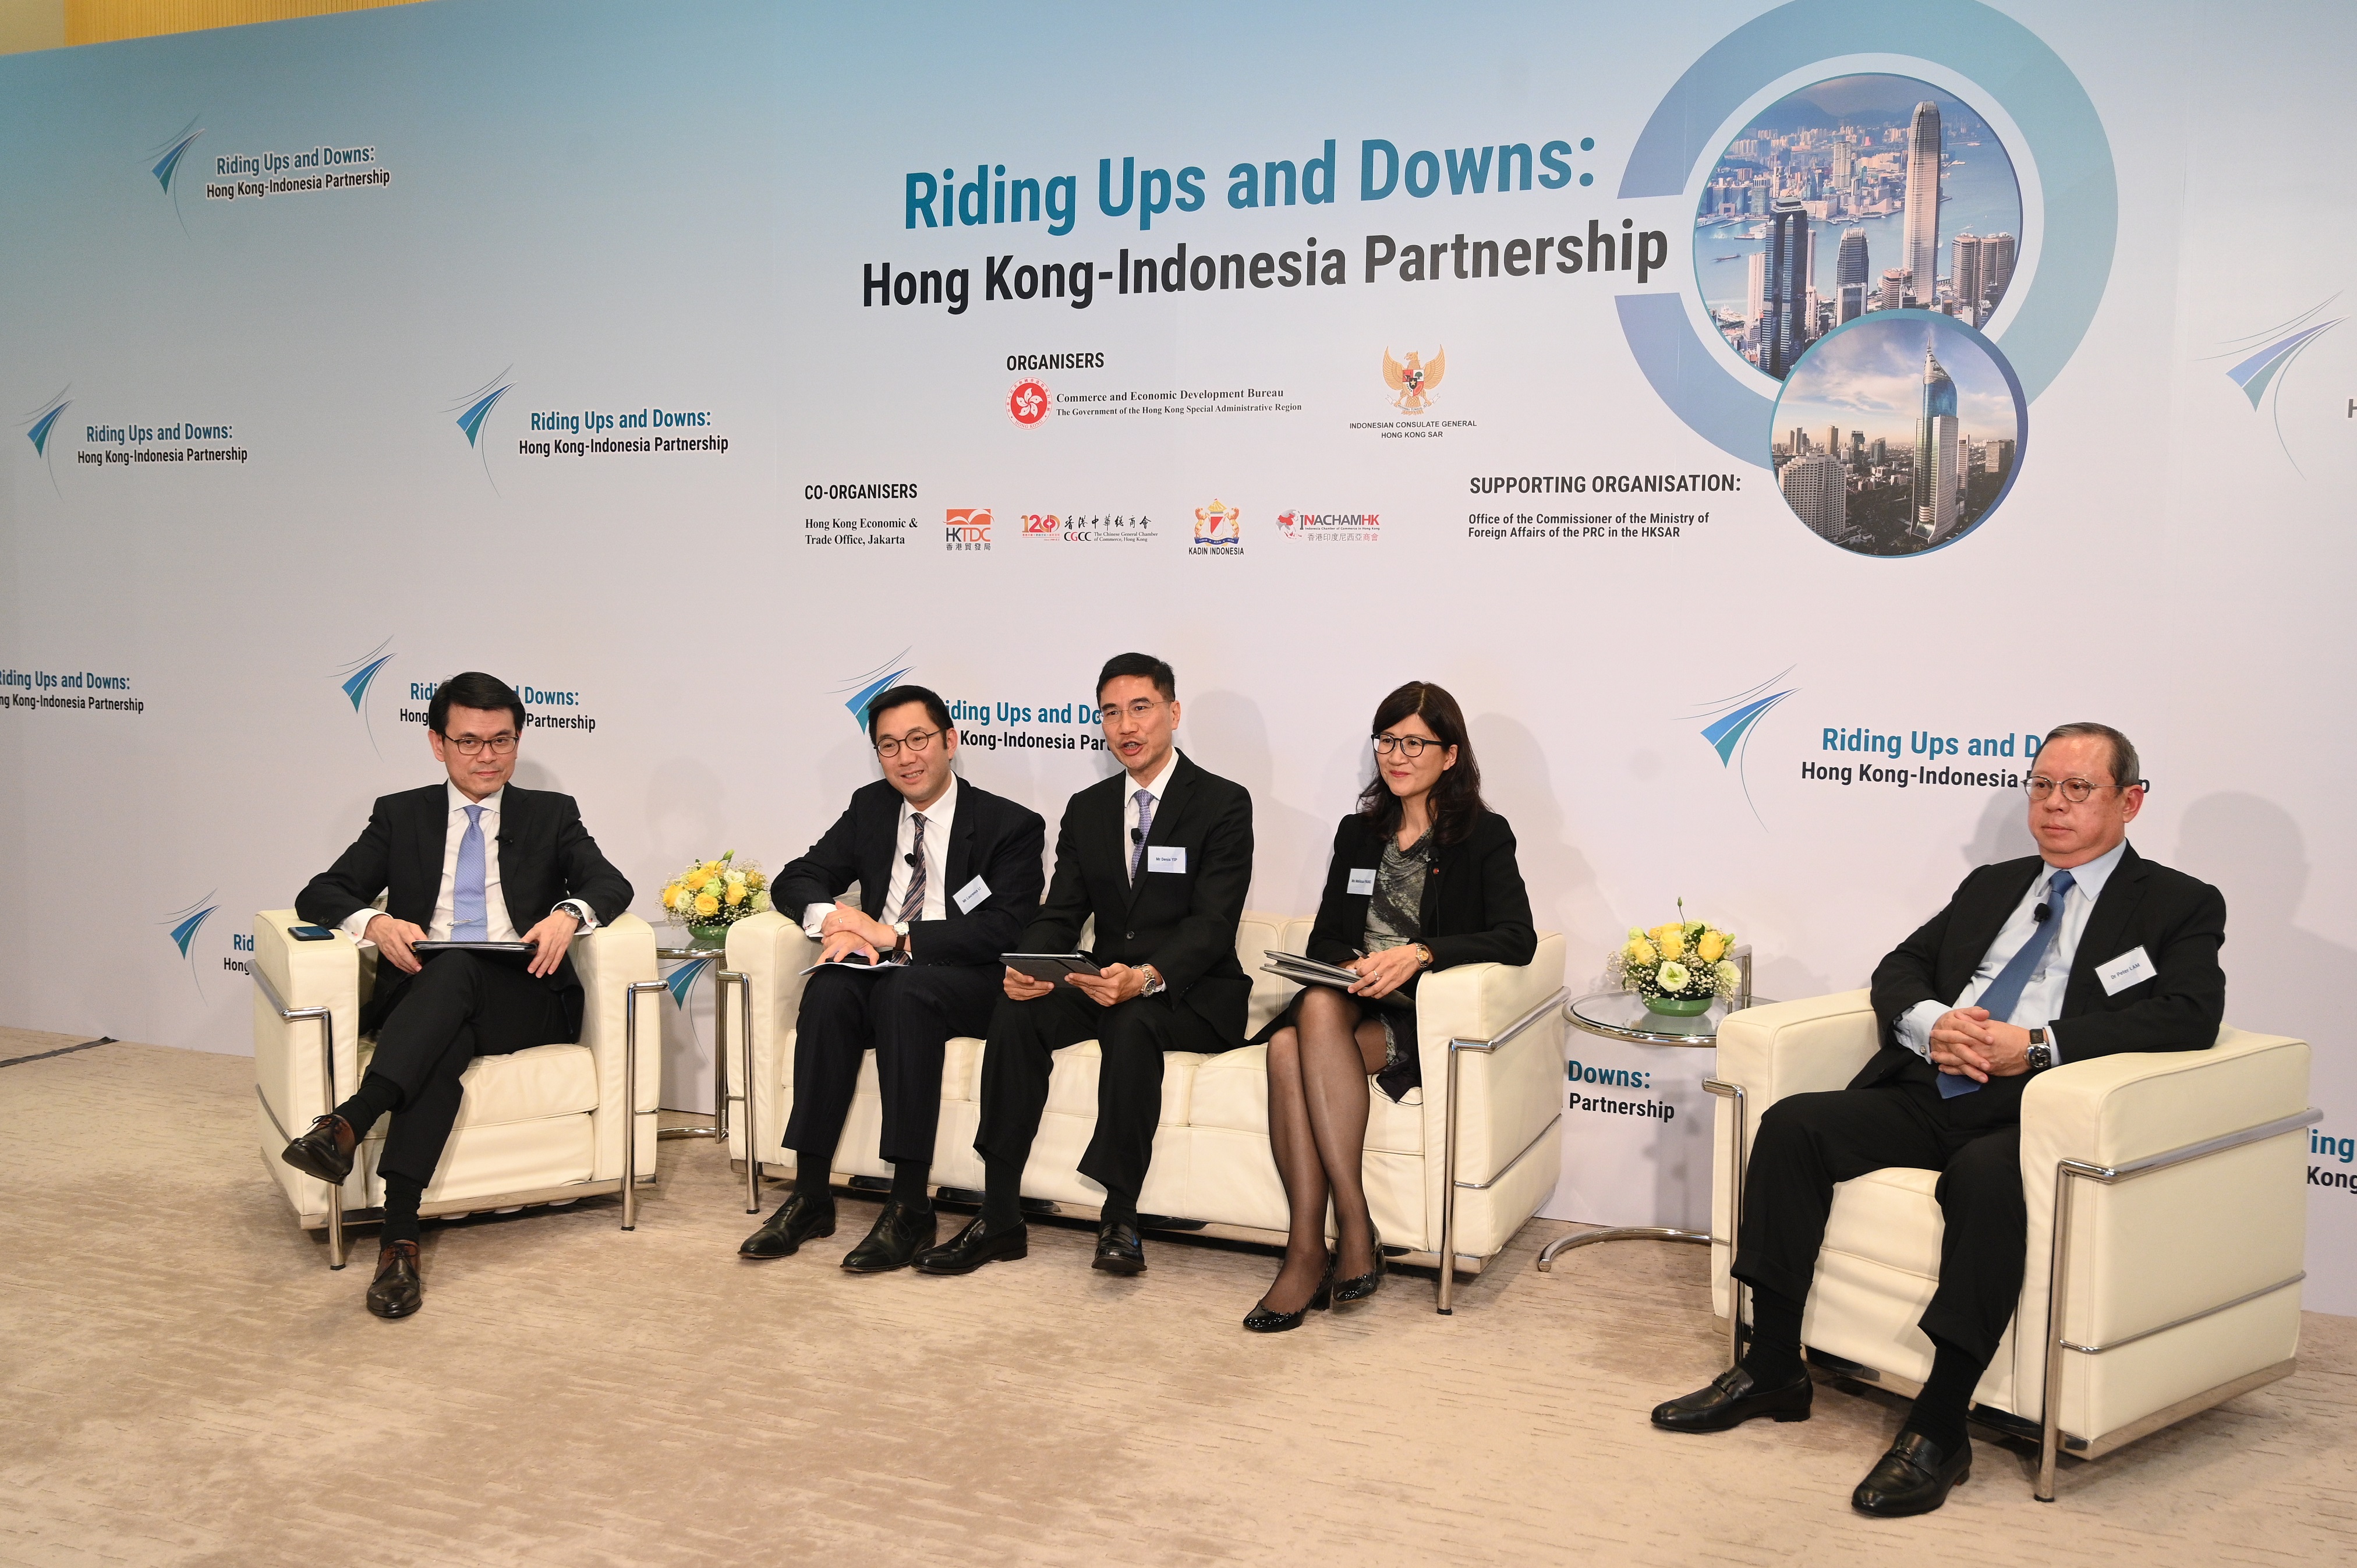 The Commerce and Economic Development Bureau and the Consulate General of the Republic of Indonesia in Hong Kong jointly held a webinar entitled Riding Ups and Downs: Hong Kong-Indonesia Partnership to strengthen partnerships in trade, investment, professional services and technology. Photo shows the Secretary for Commerce and Economic Development, Mr Edward Yau (first left), responding to participants’ questions at the webinar with (from second left) the Chairman of the Financial Services Development Council, Mr Laurence Li; the Commissioner for Belt and Road, Mr Denis Yip; the President of the Law Society of Hong Kong, Ms Melissa Pang and the Chairman of the Hong Kong Trade Development Council, Dr Peter Lam.